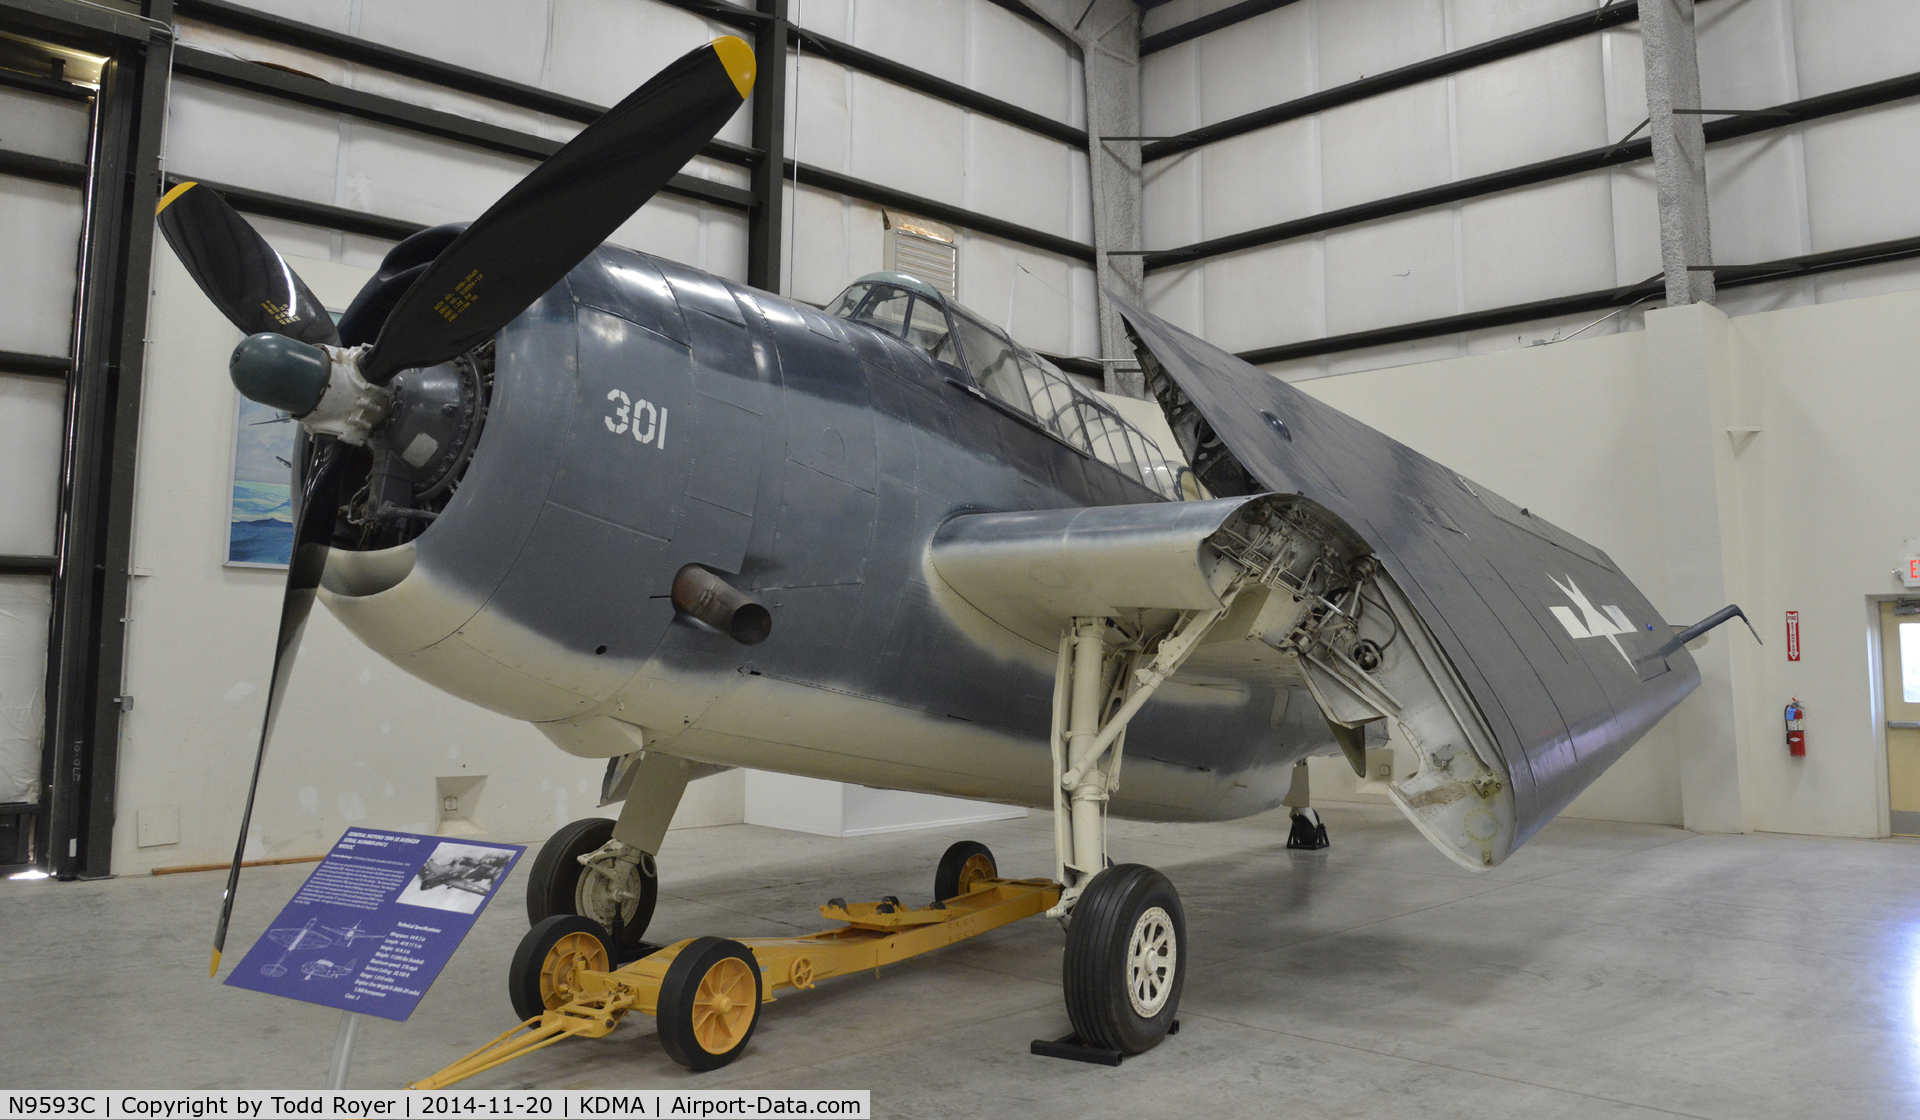 N9593C, Grumman TBM-3 Avenger C/N 69472/2211, On display at the Pima Air and Space Museum